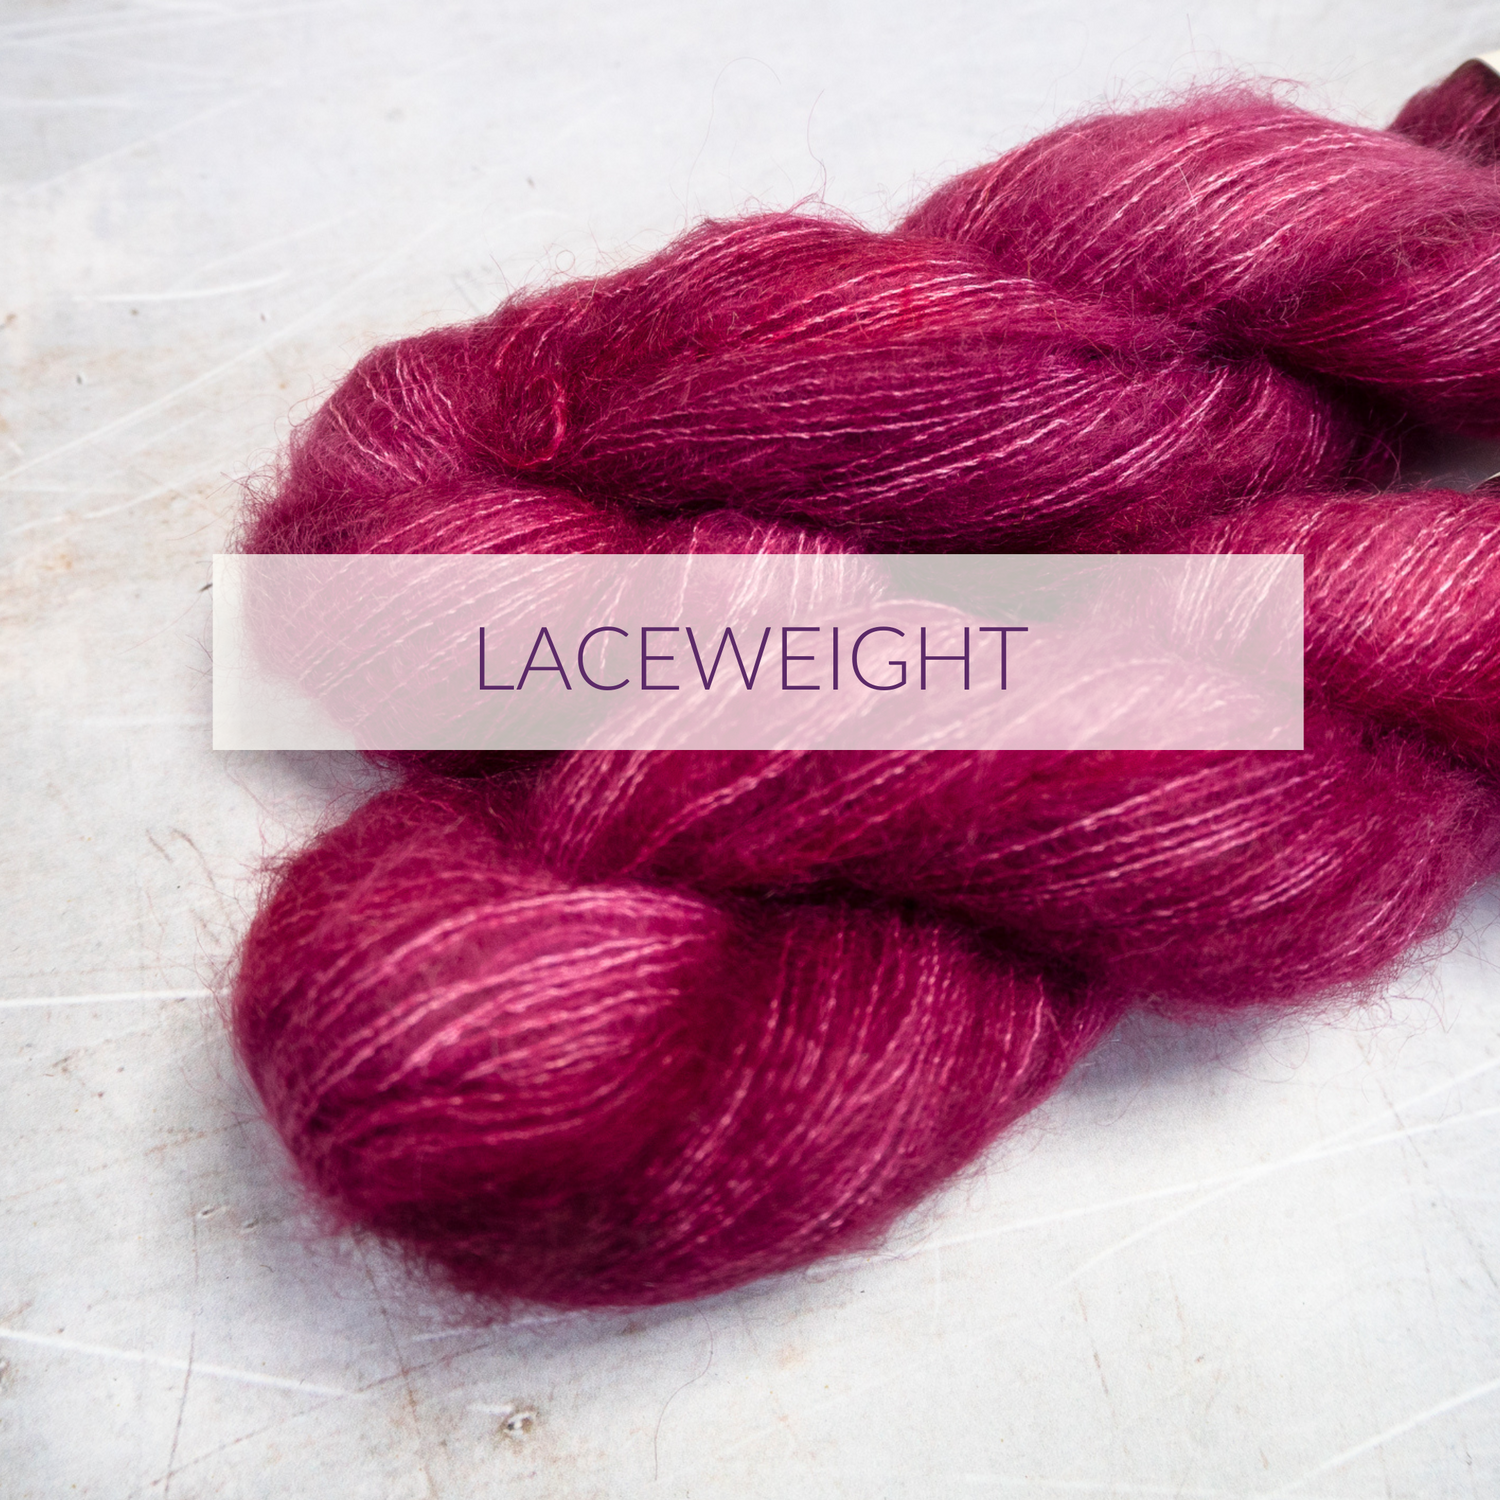 Laceweight